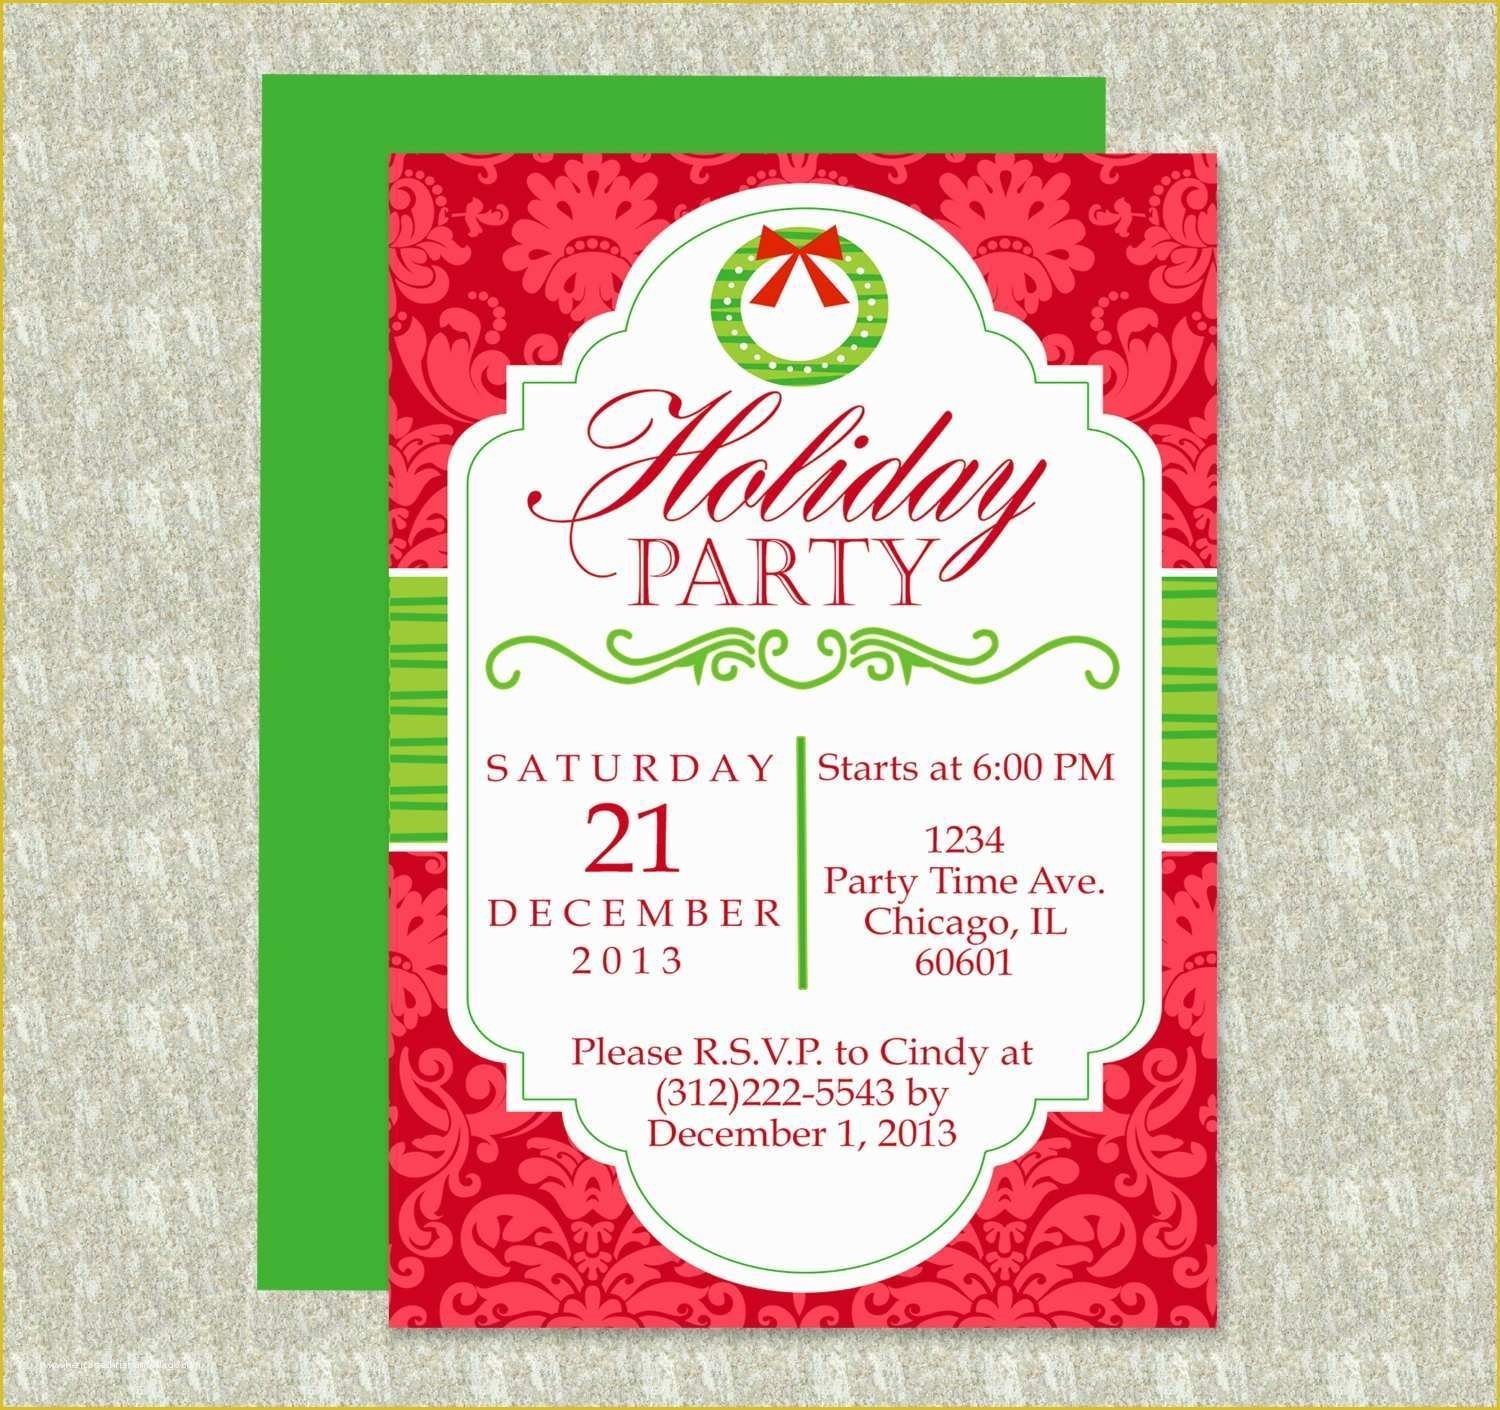 Office Christmas Party Flyer Templates Free Of Holiday Party Invitation In Free Christmas Invitation Templates For Word